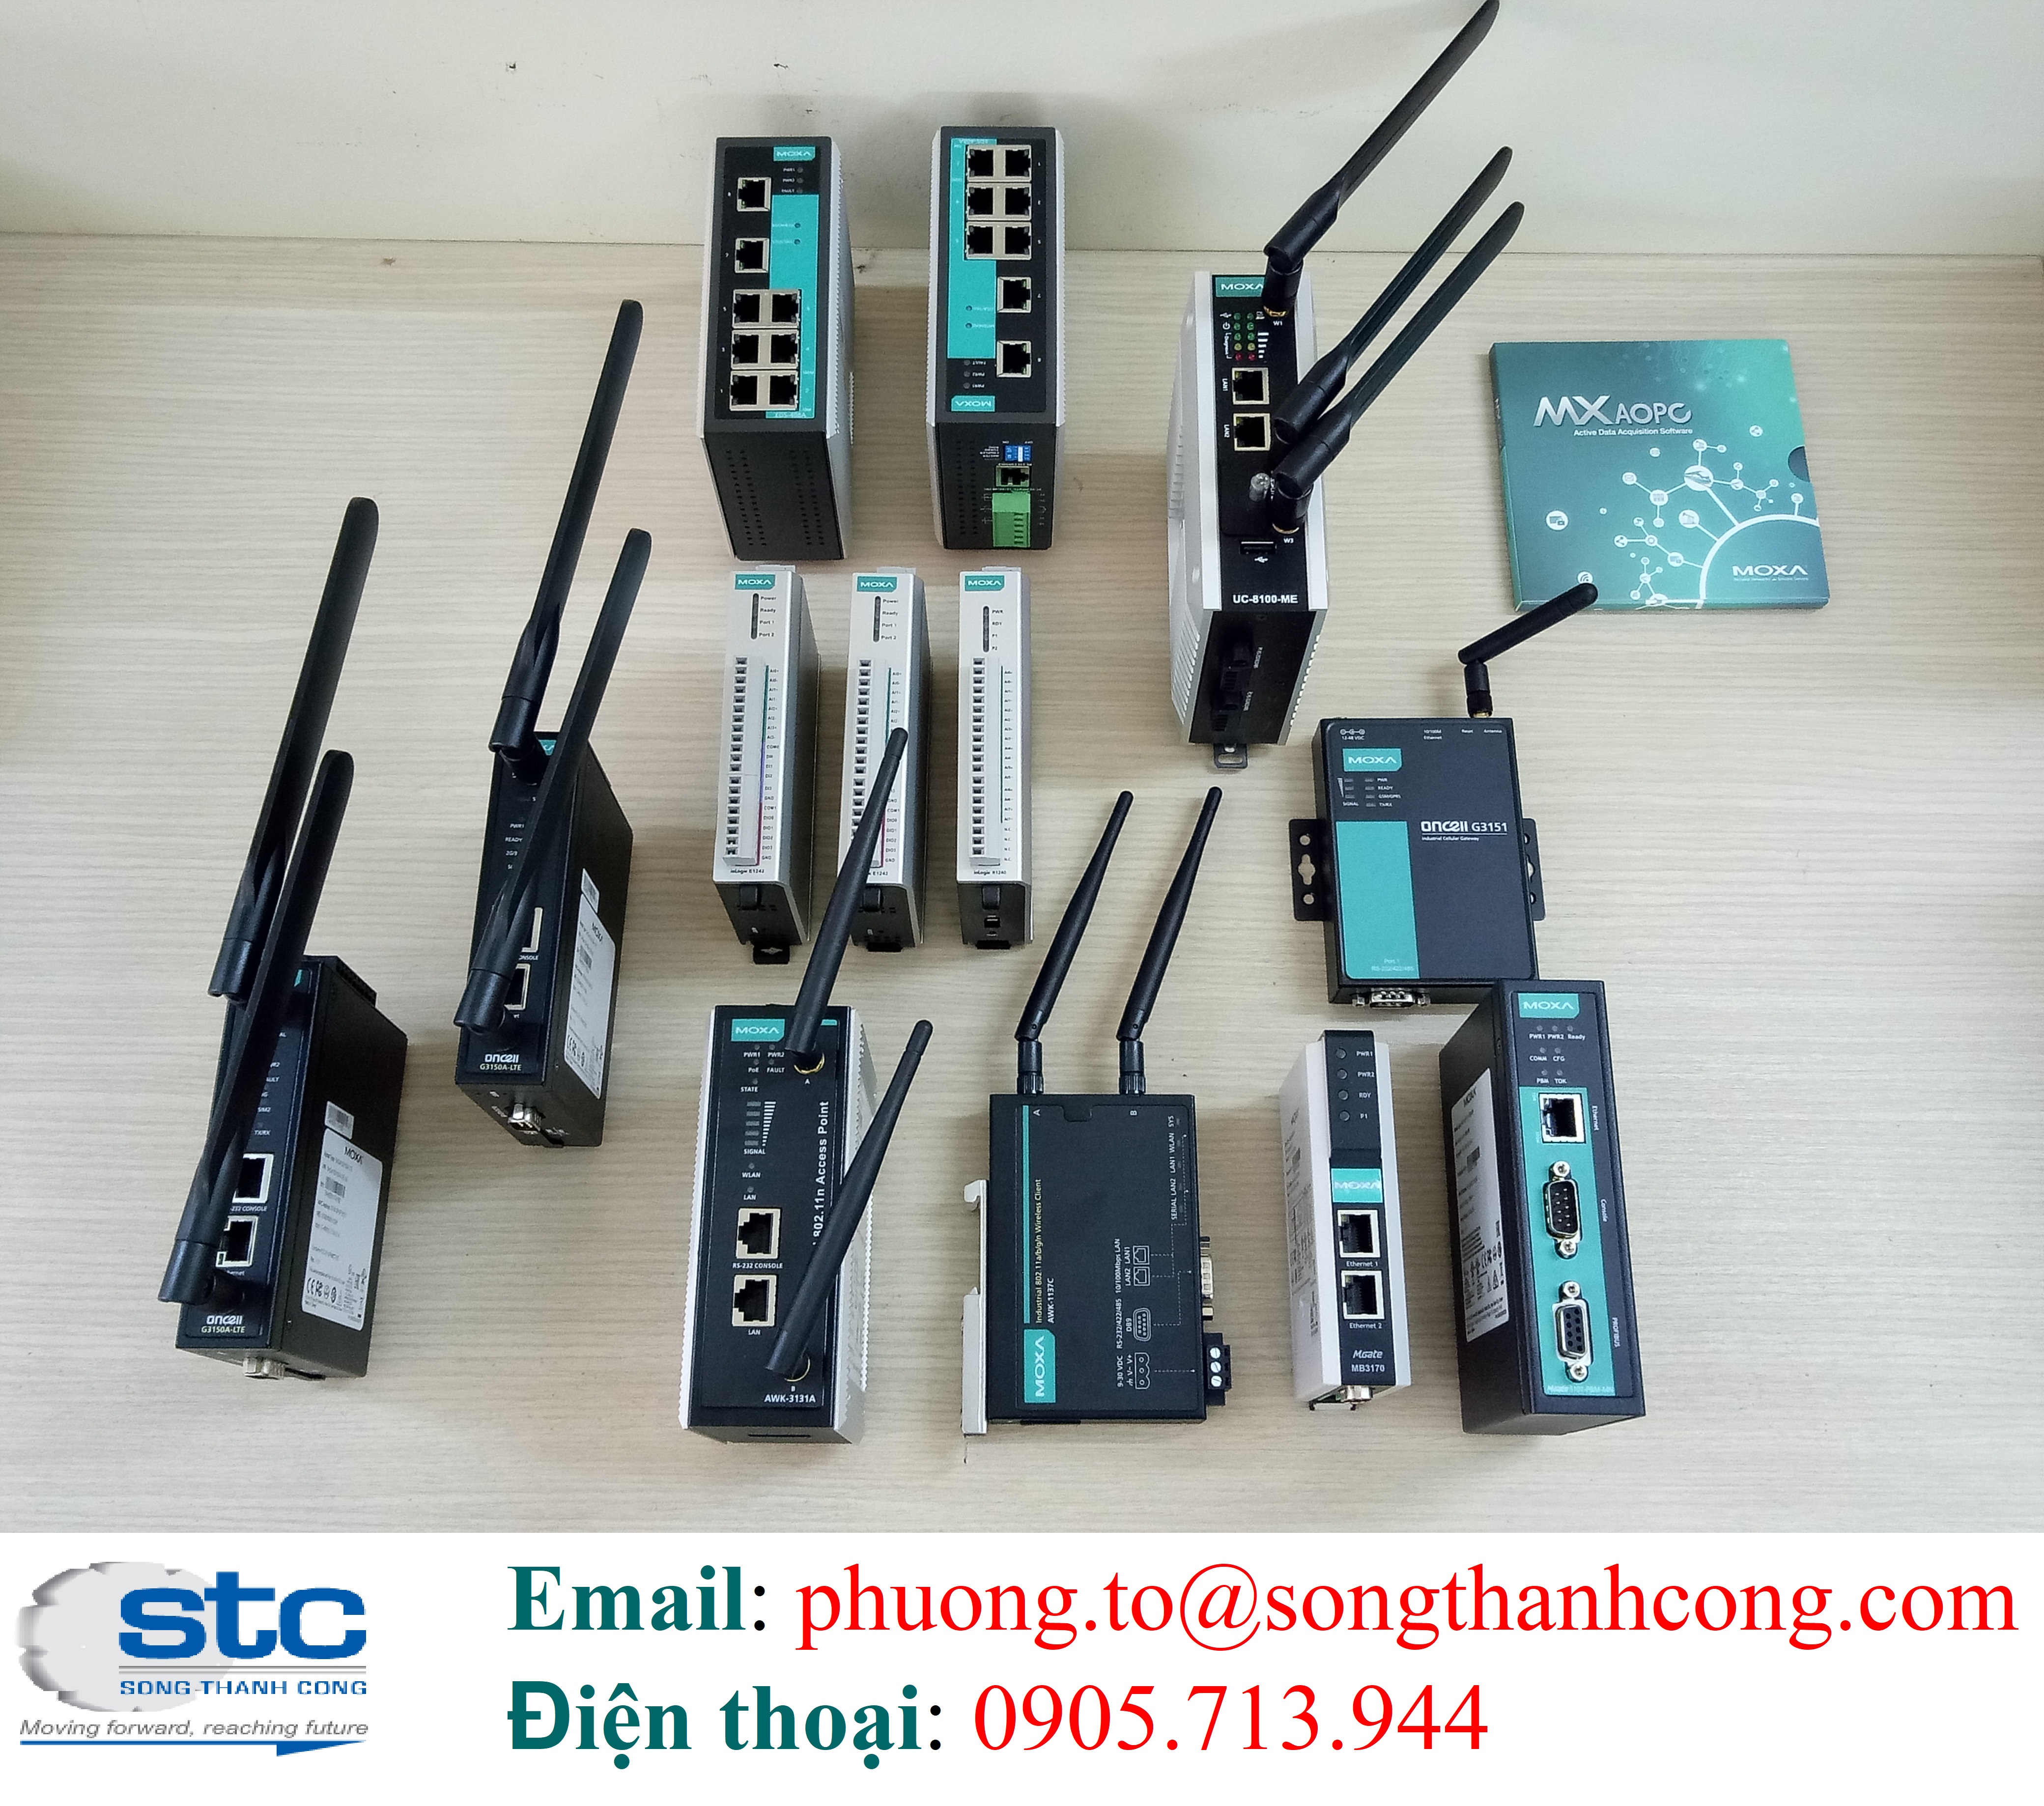 thiet-bi-mang-truyen-thong-cong-nghiep-moxa-nport-w2250a-song-thanh-cong-autho-stc-viet-nam-autho.png